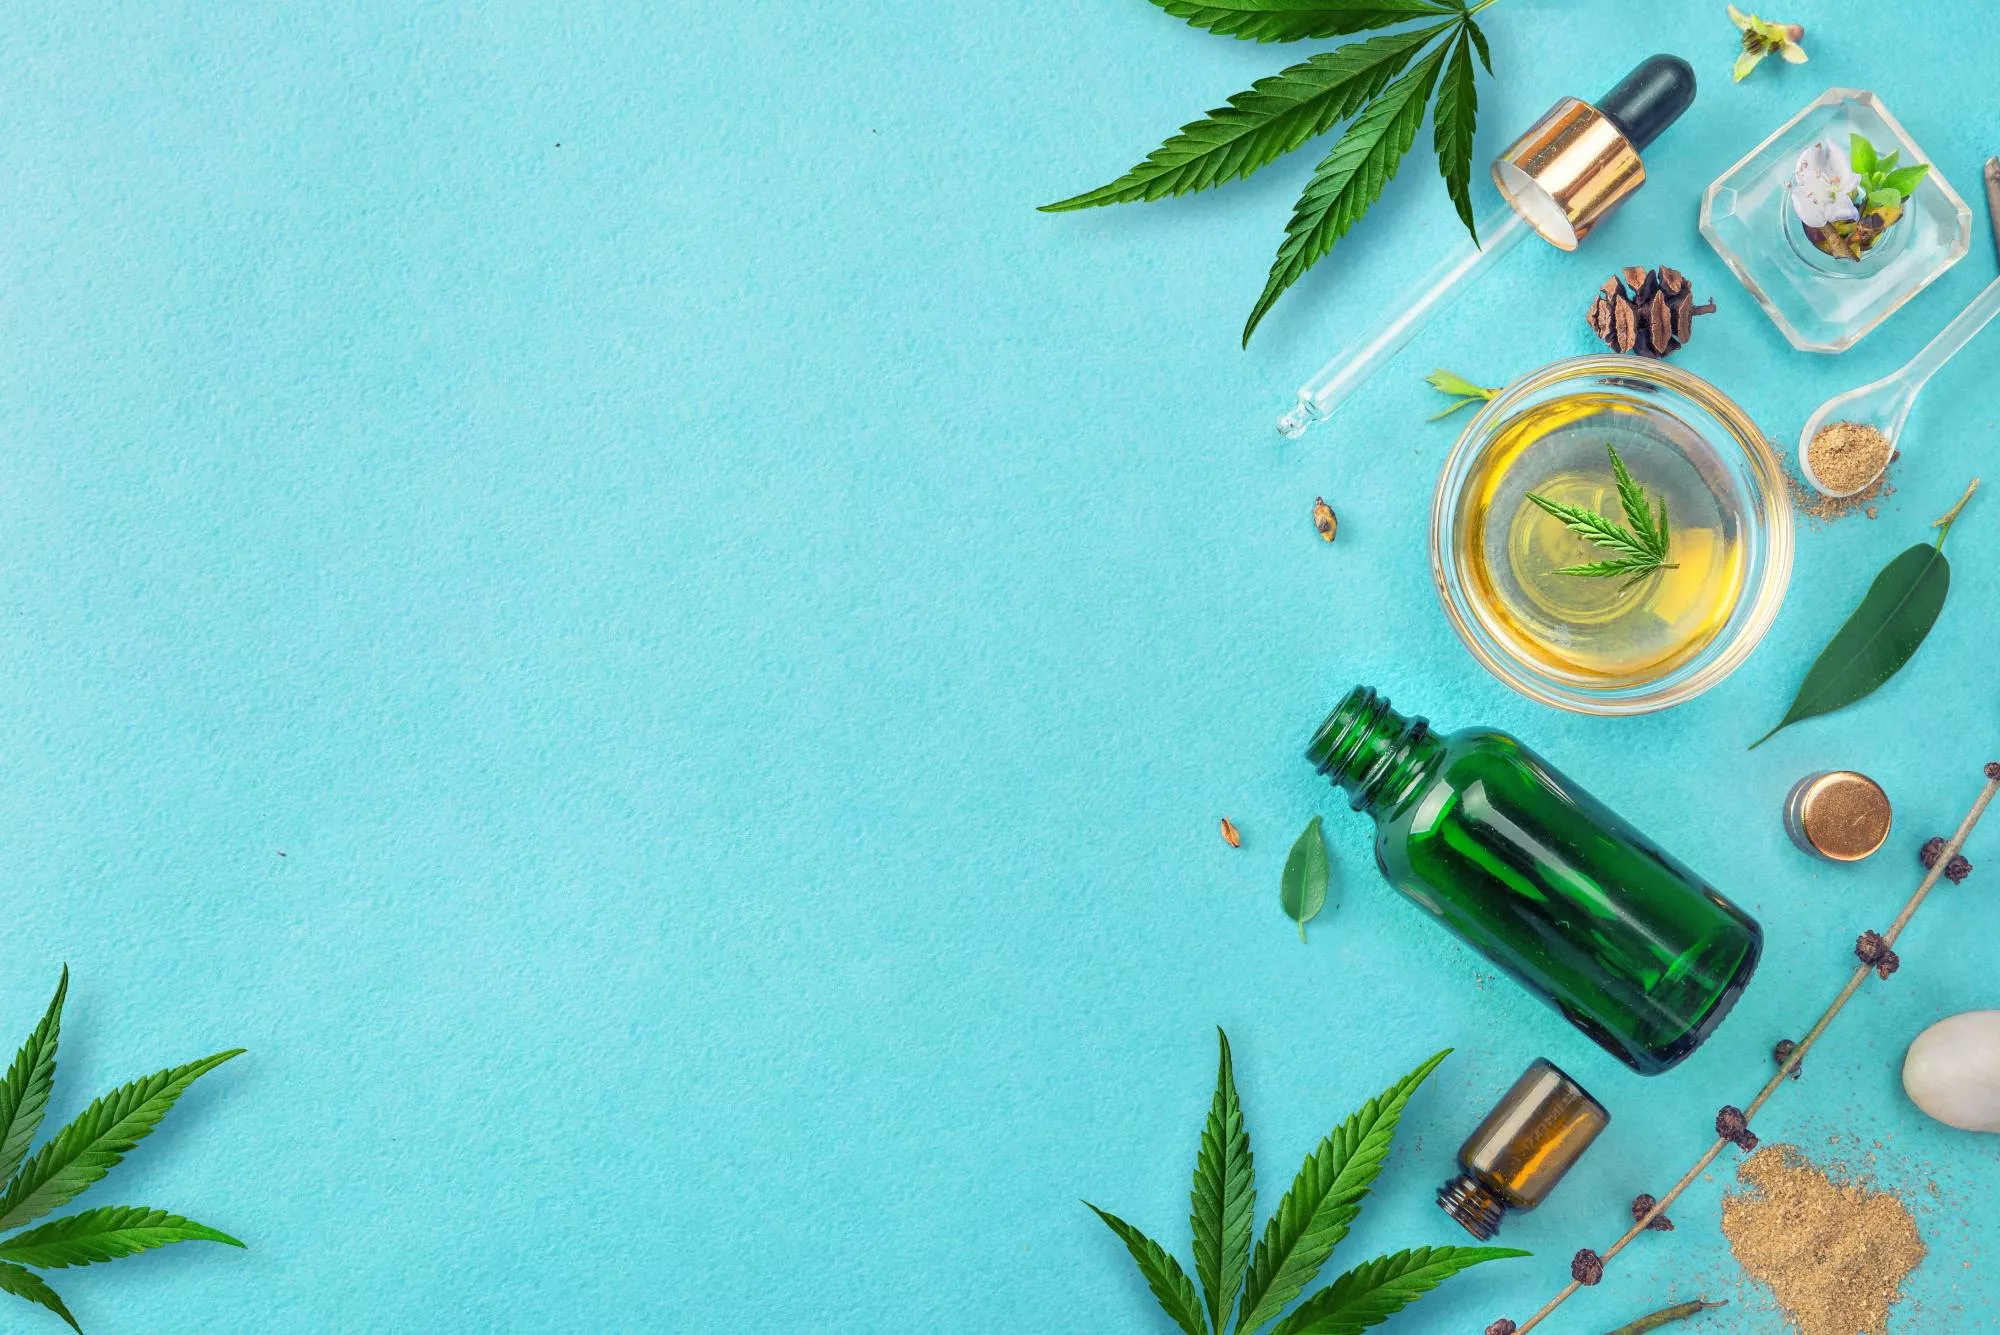 Various CBD products and hemp leaves from a business owner selling CBD on Etsy against a blue background.